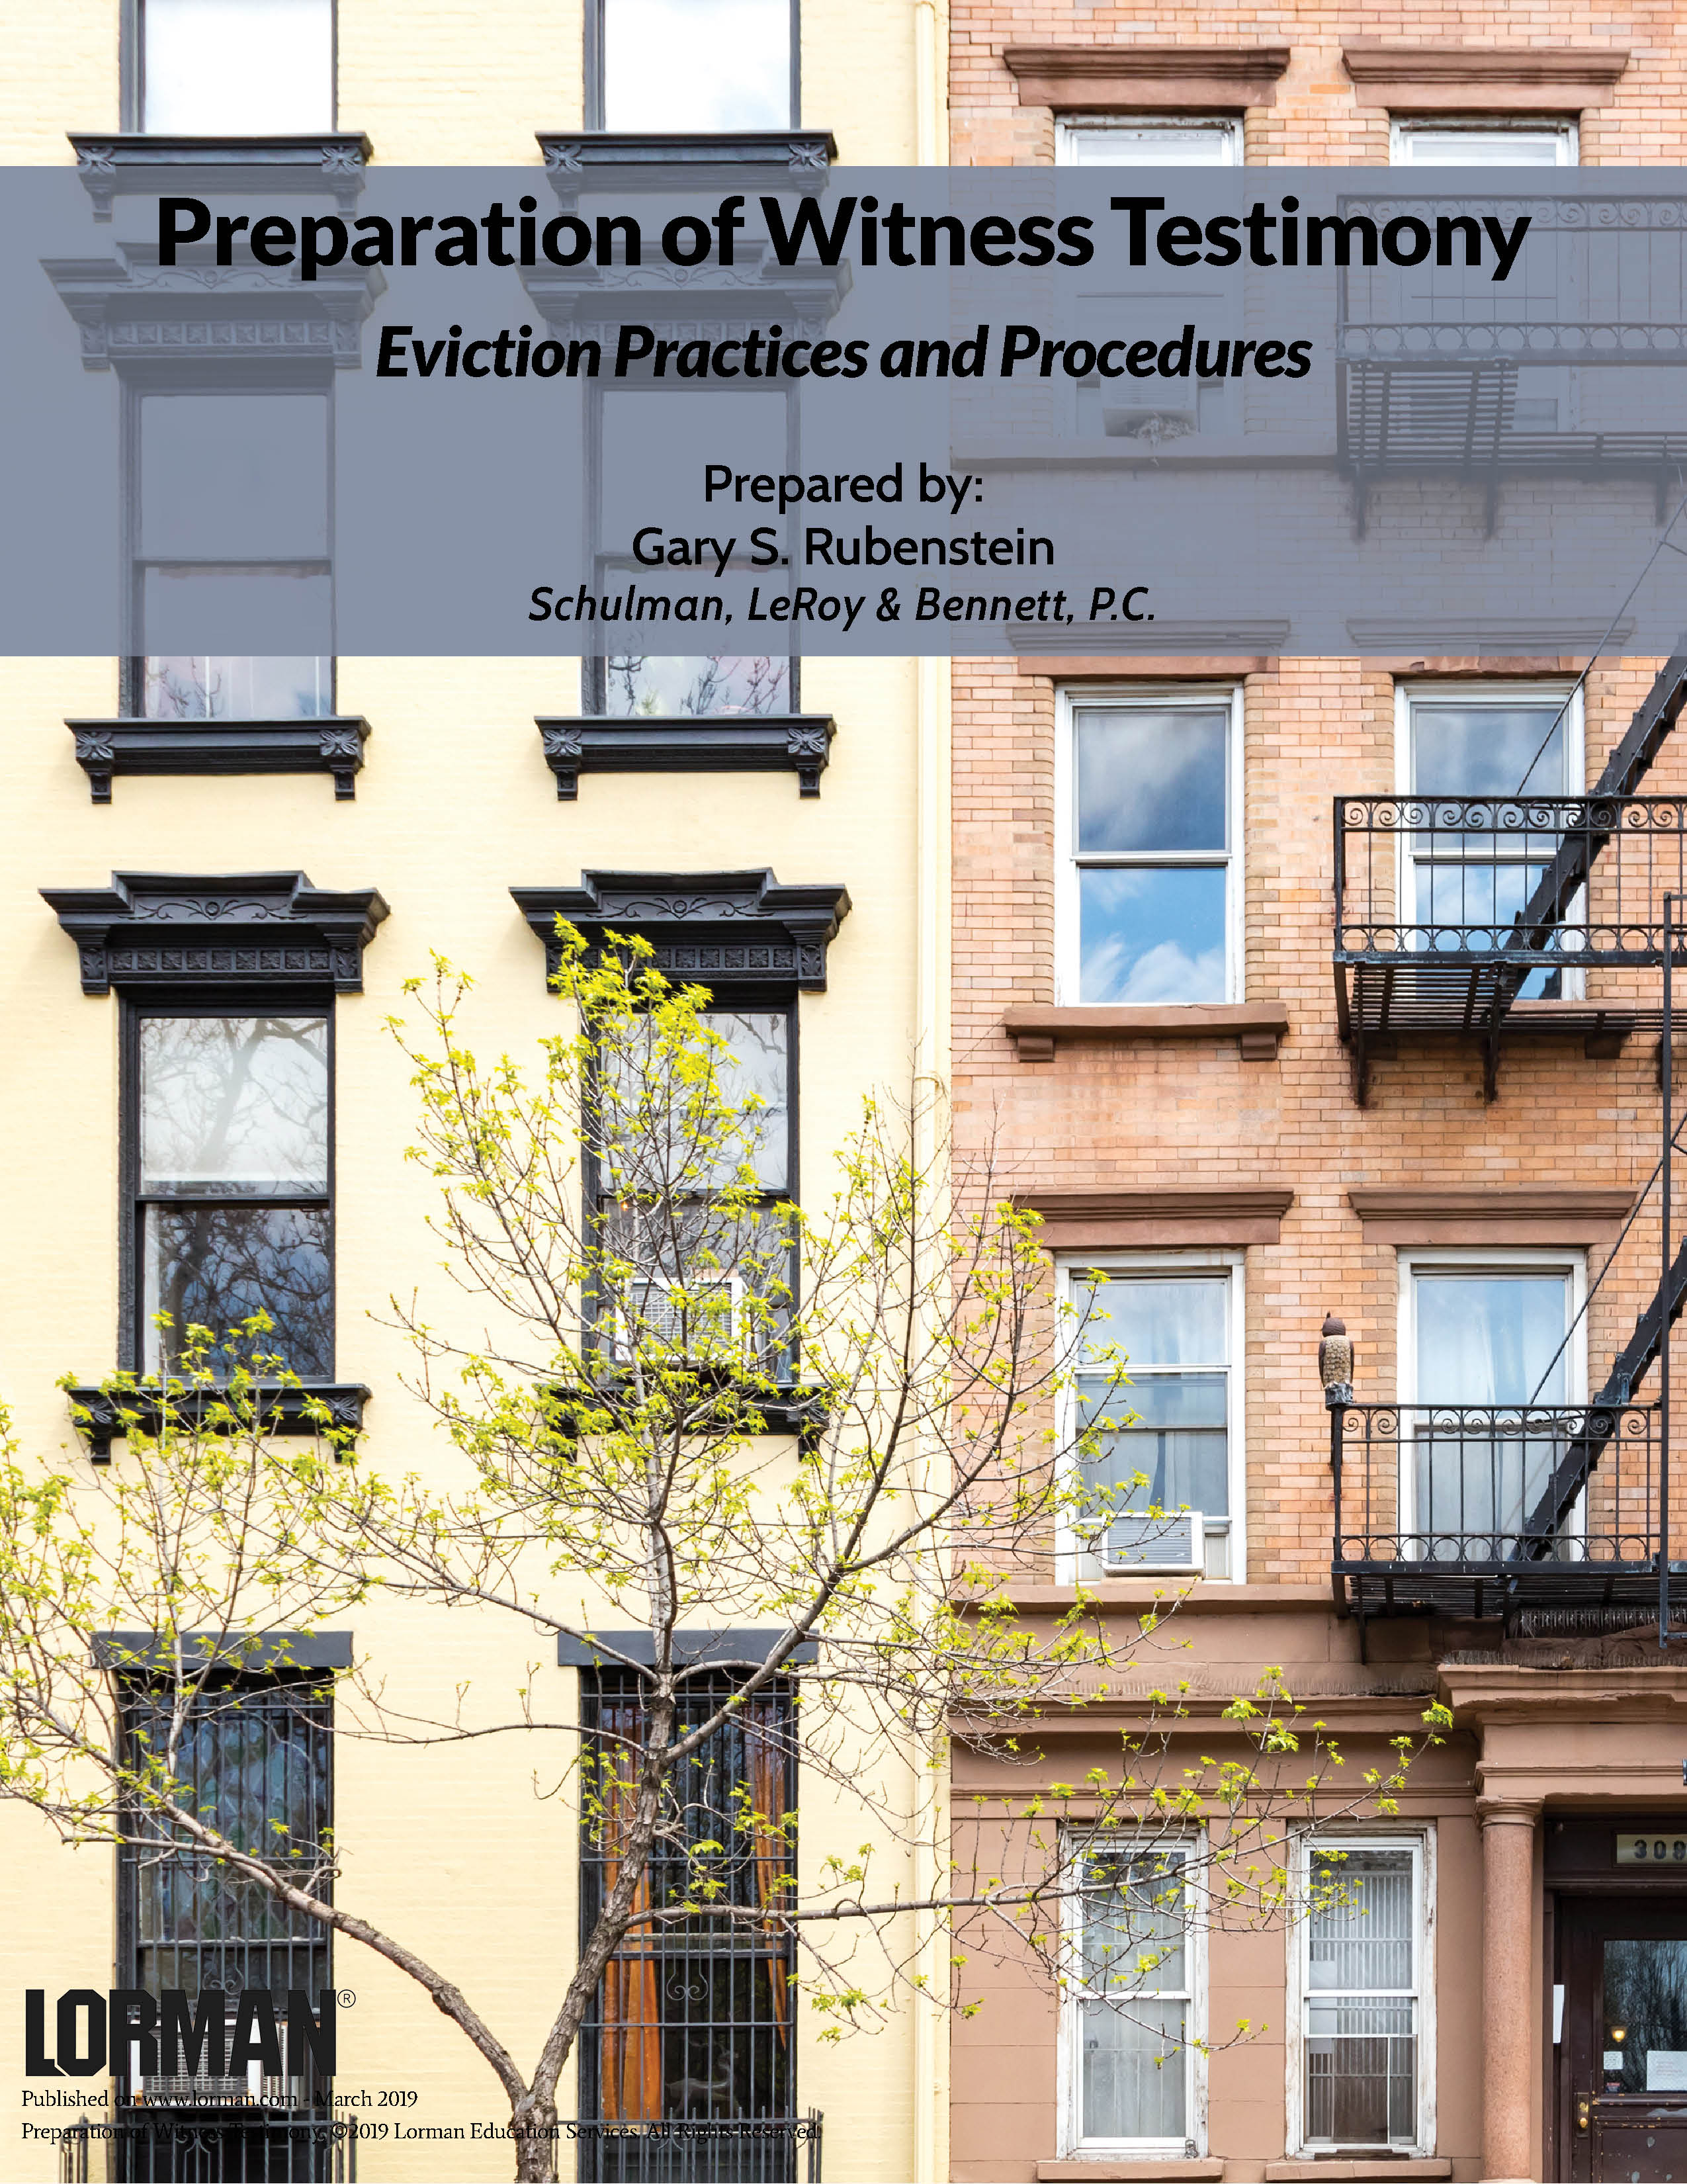 Preparation of Witness Testimony - Eviction Practices and Procedures